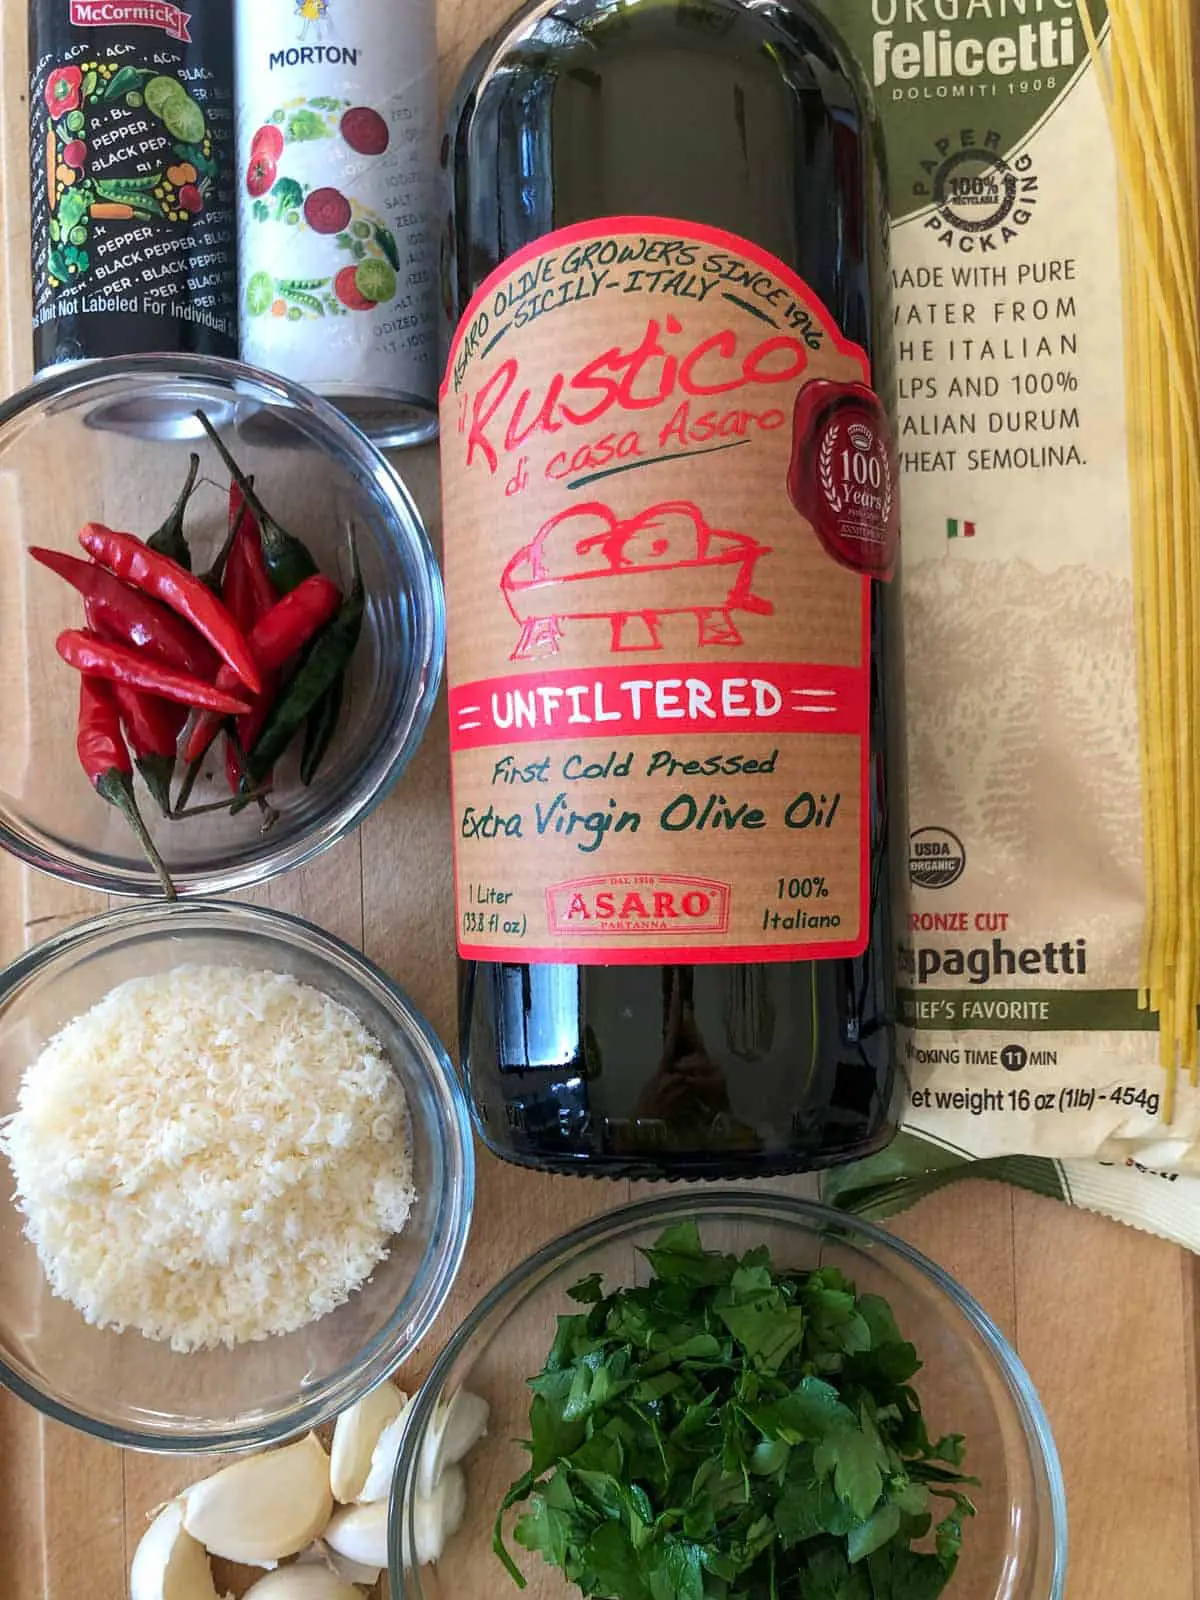 Salt and pepper shakers, a glass bowl with Thai chilies, a glass bowl with grated Parmesan cheese, garlic cloves, a glass bowl with chopped Italian parsley, a bottle of olive oil and a package of spaghetti.